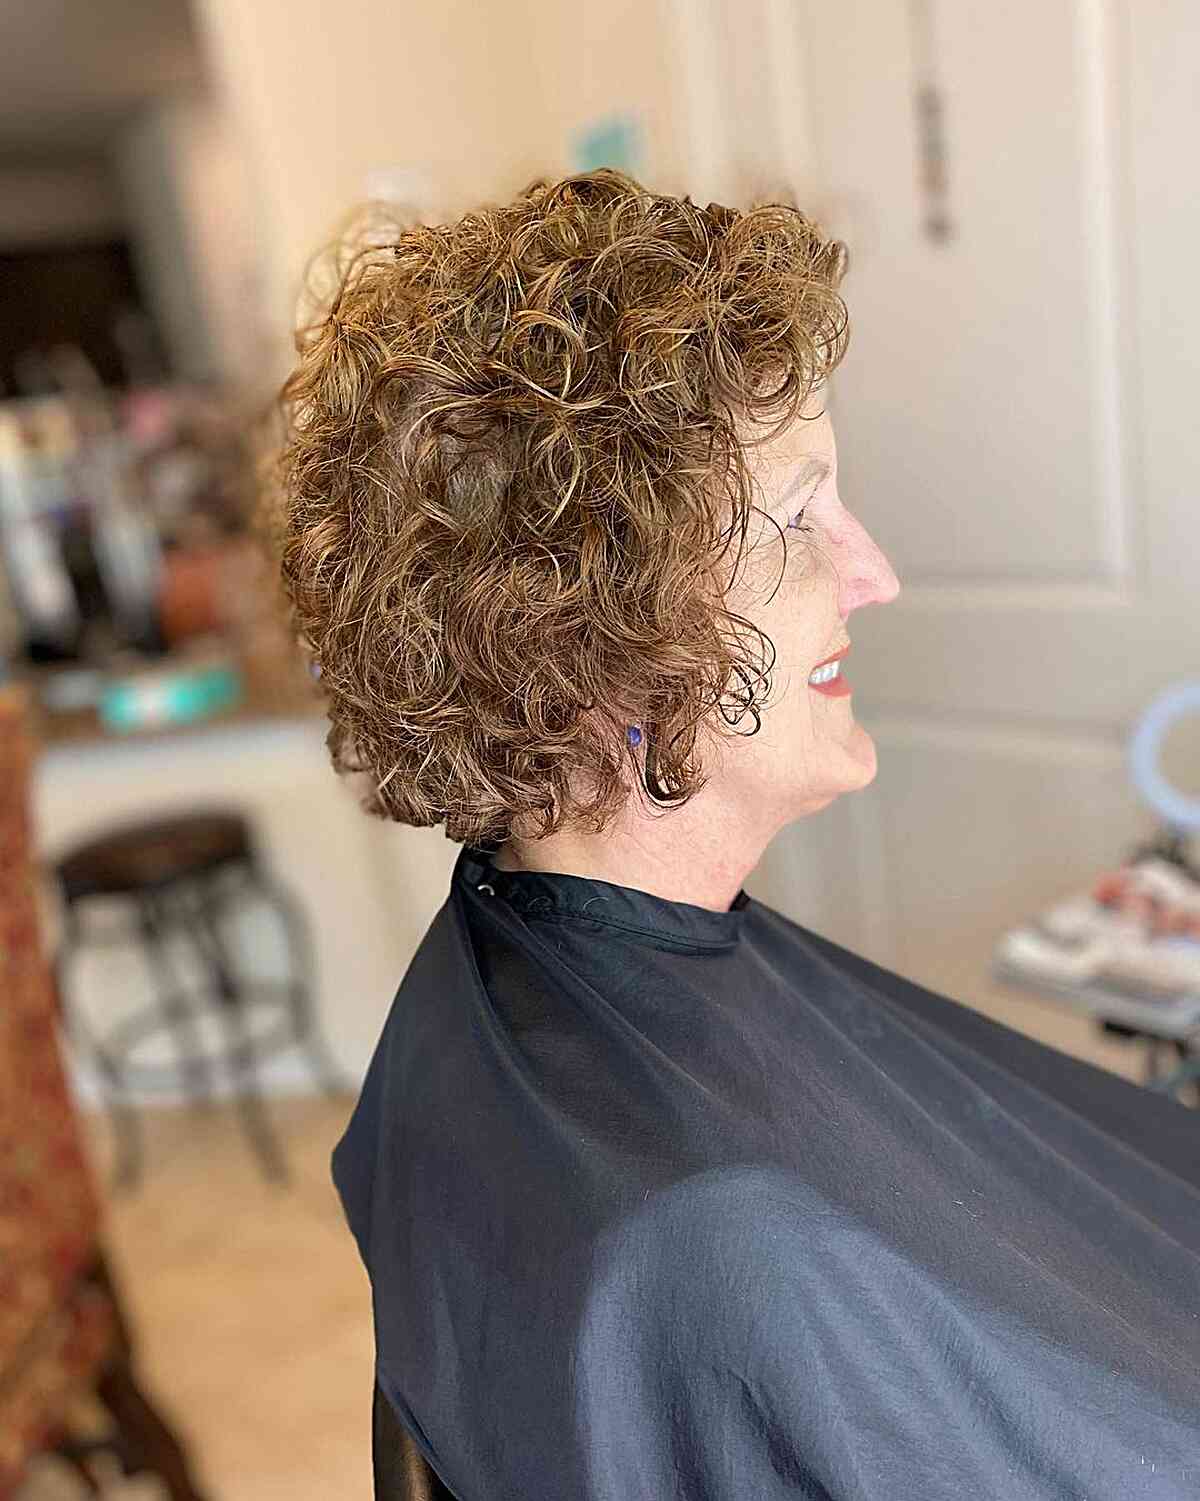 Short Jaw-Length Crop with Textured Curls for Women Over 60